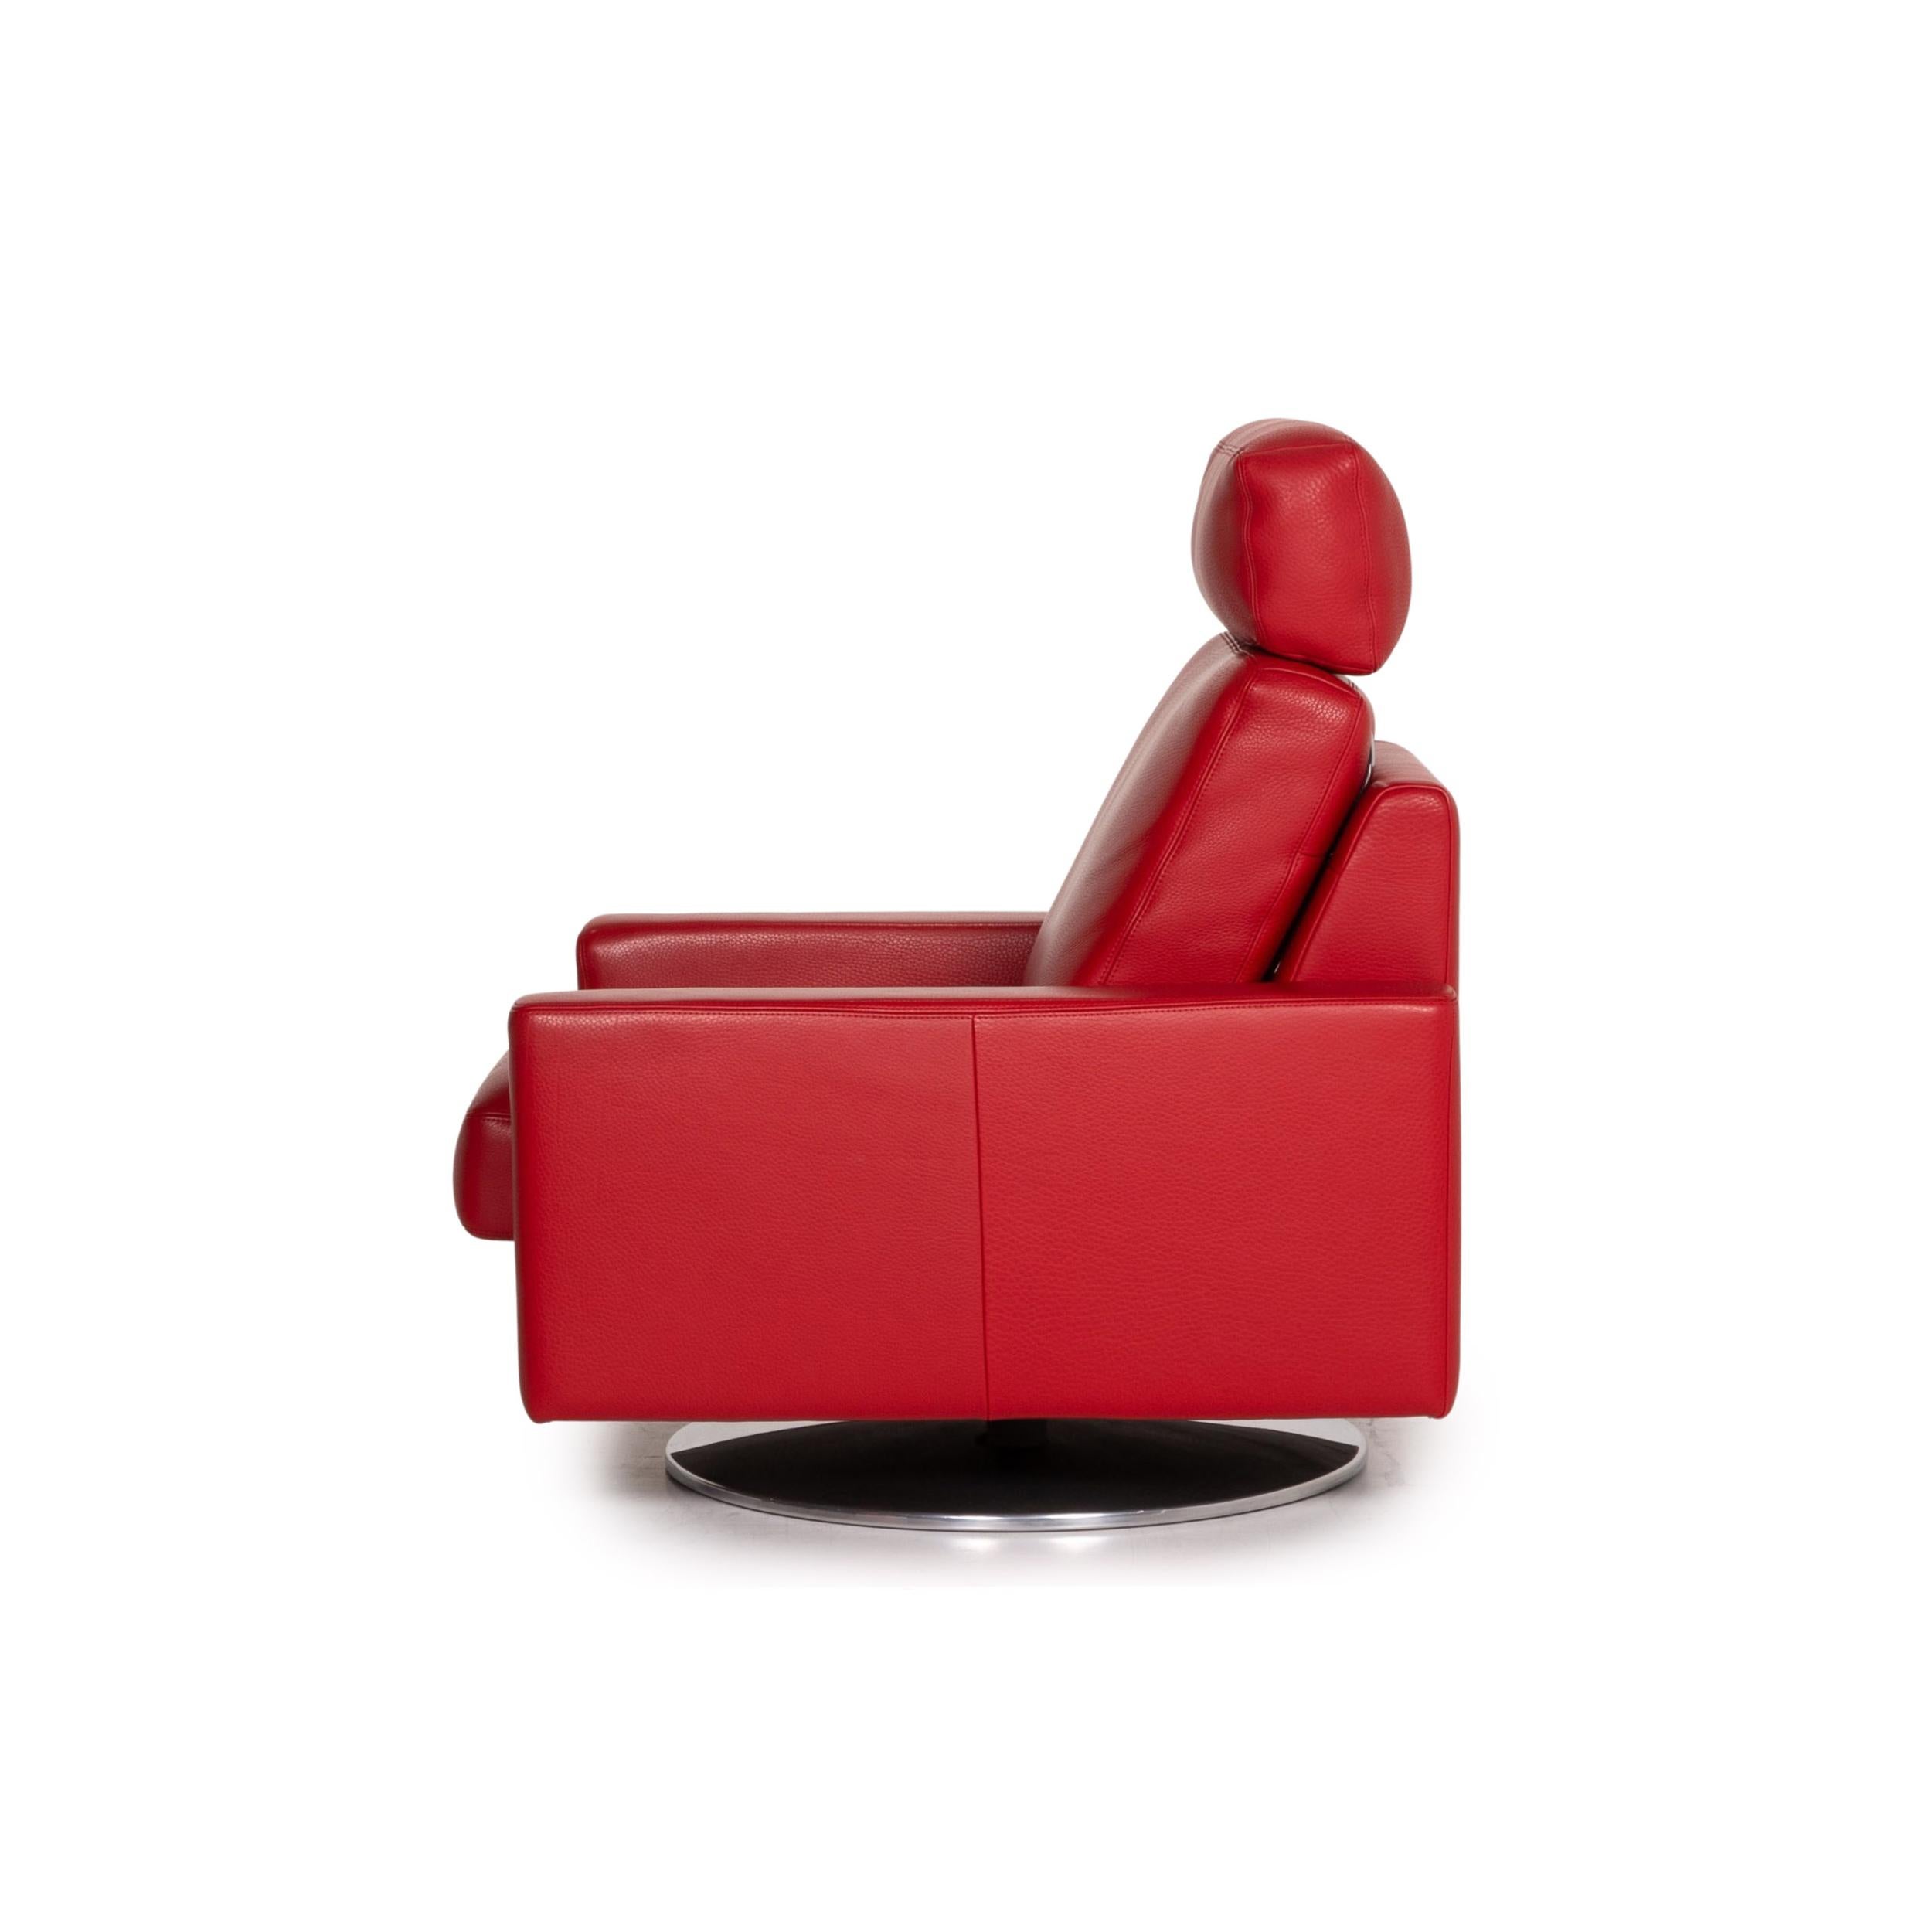 Erpo Leather Armchair Incl. Stool Red 6